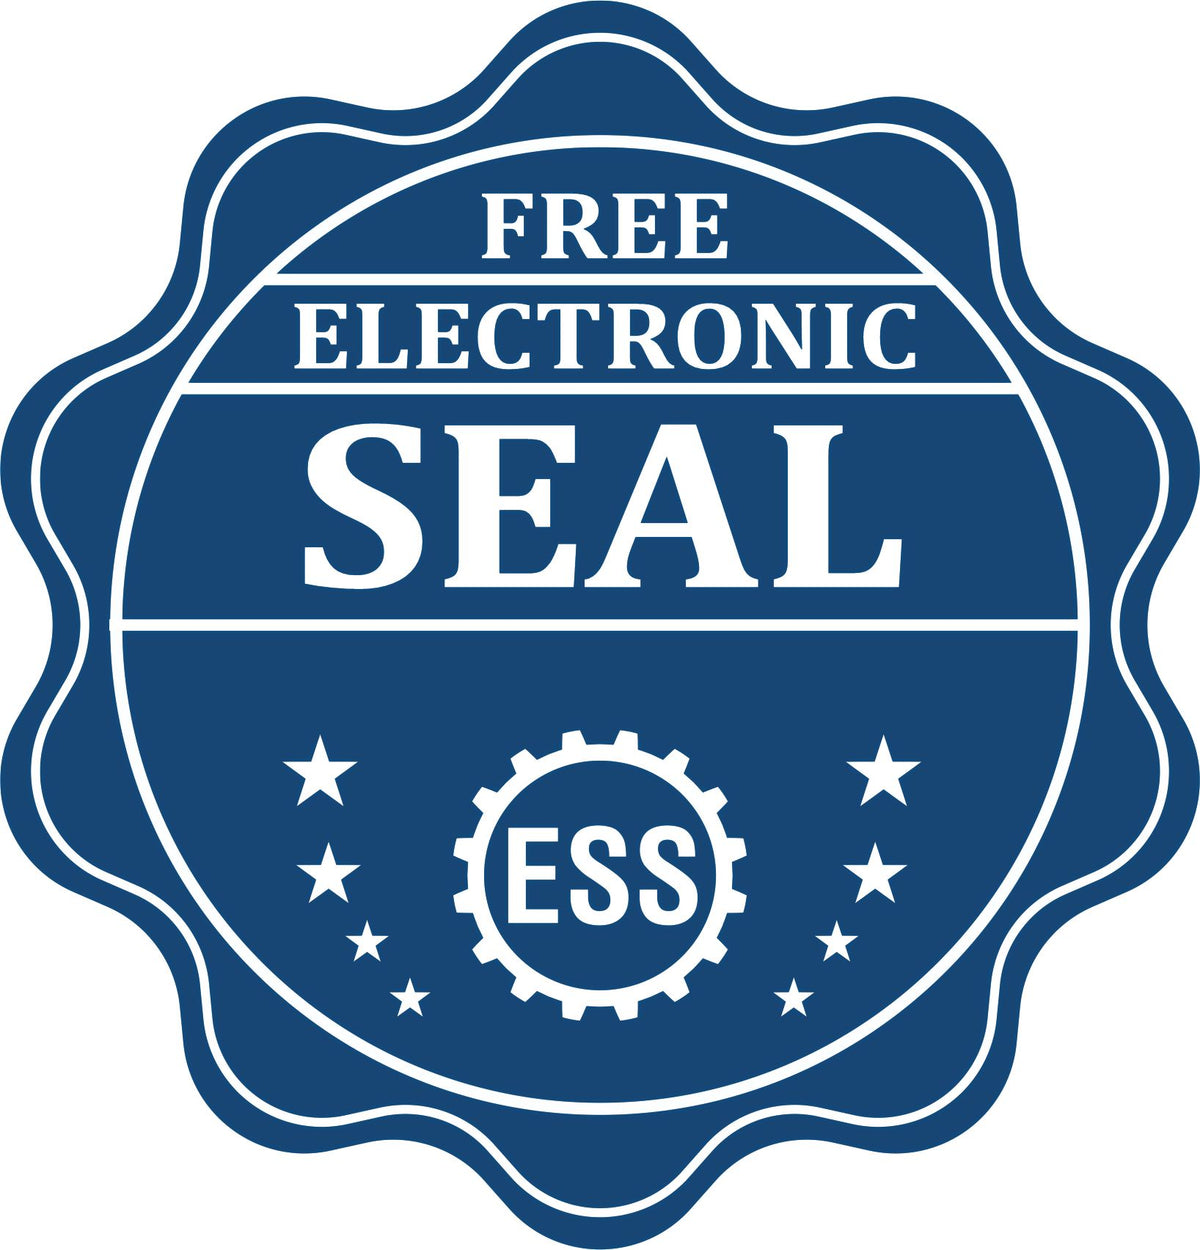 A badge showing a free electronic seal for the Heavy-Duty Rhode Island Rectangular Notary Stamp with stars and the ESS gear on the emblem.